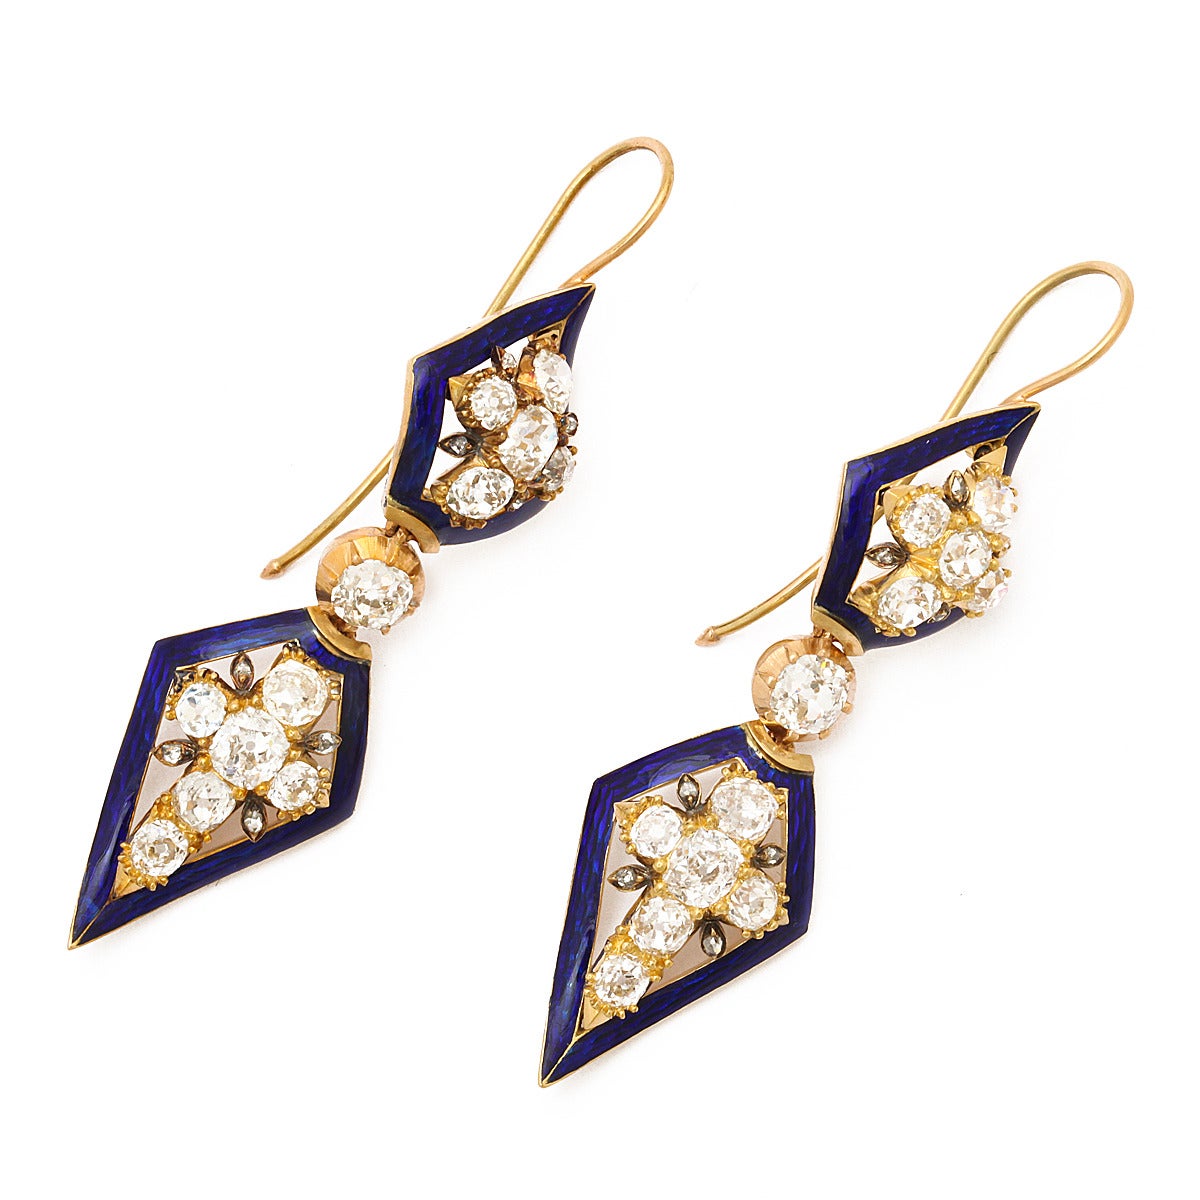 Victorian lozenge-form pendant earrings with old-mine diamonds and dark blue enamel borders, set in gold.

English ca 1870.
Length: 2 1/2 inches
(approx. 10 cts total)